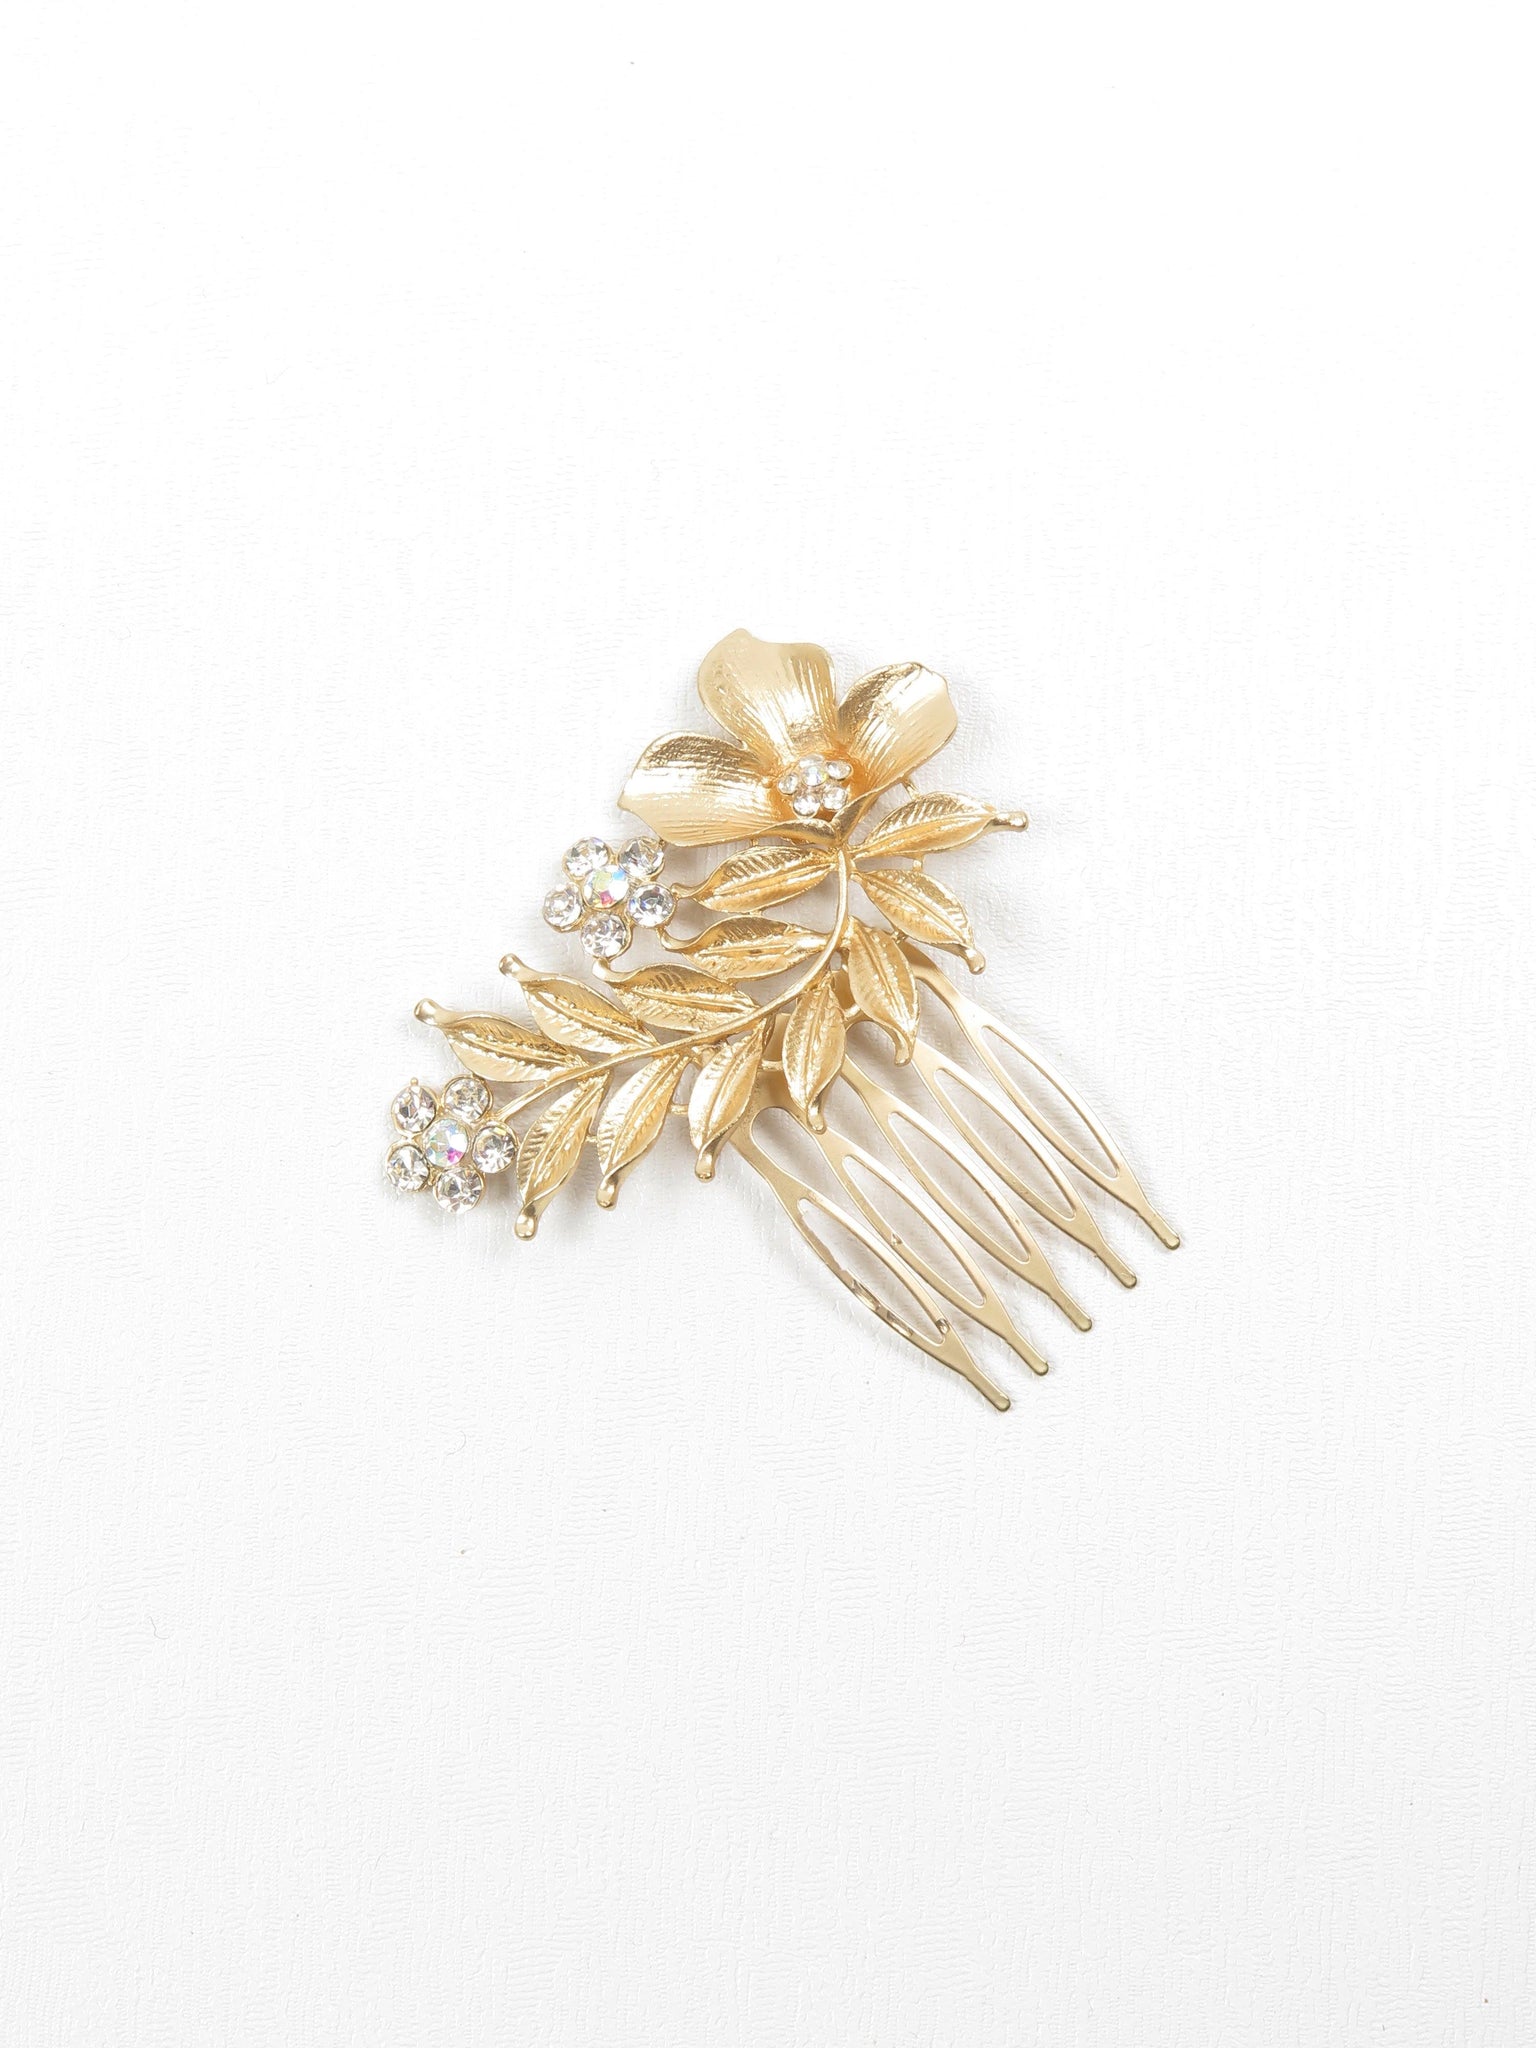 Gold  Floral Small Hair Comb - The Harlequin